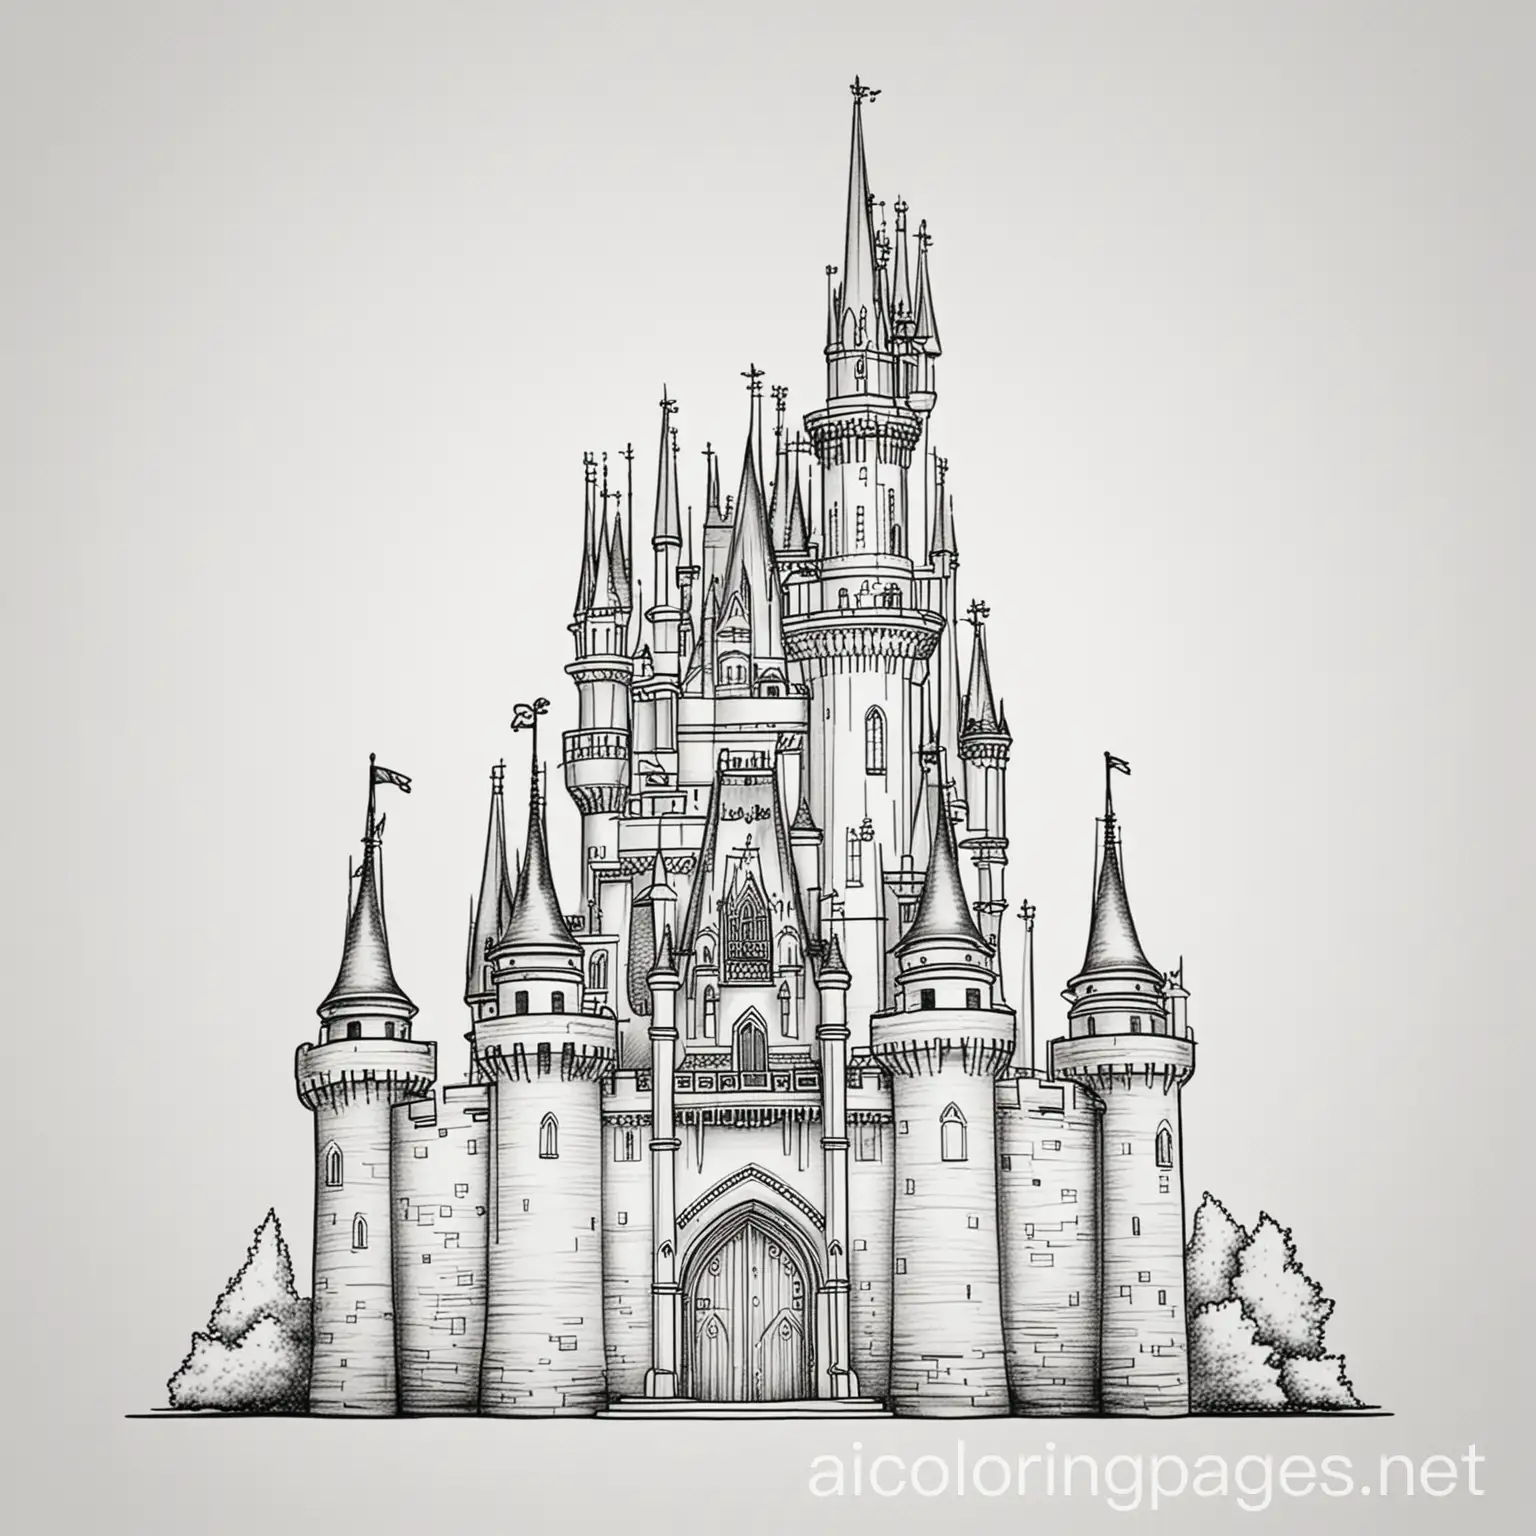 simple cinderella castle, Coloring Page, black and white, line art, white background, Simplicity, Ample White Space. The background of the coloring page is plain white to make it easy for young children to color within the lines. The outlines of all the subjects are easy to distinguish, making it simple for kids to color without too much difficulty